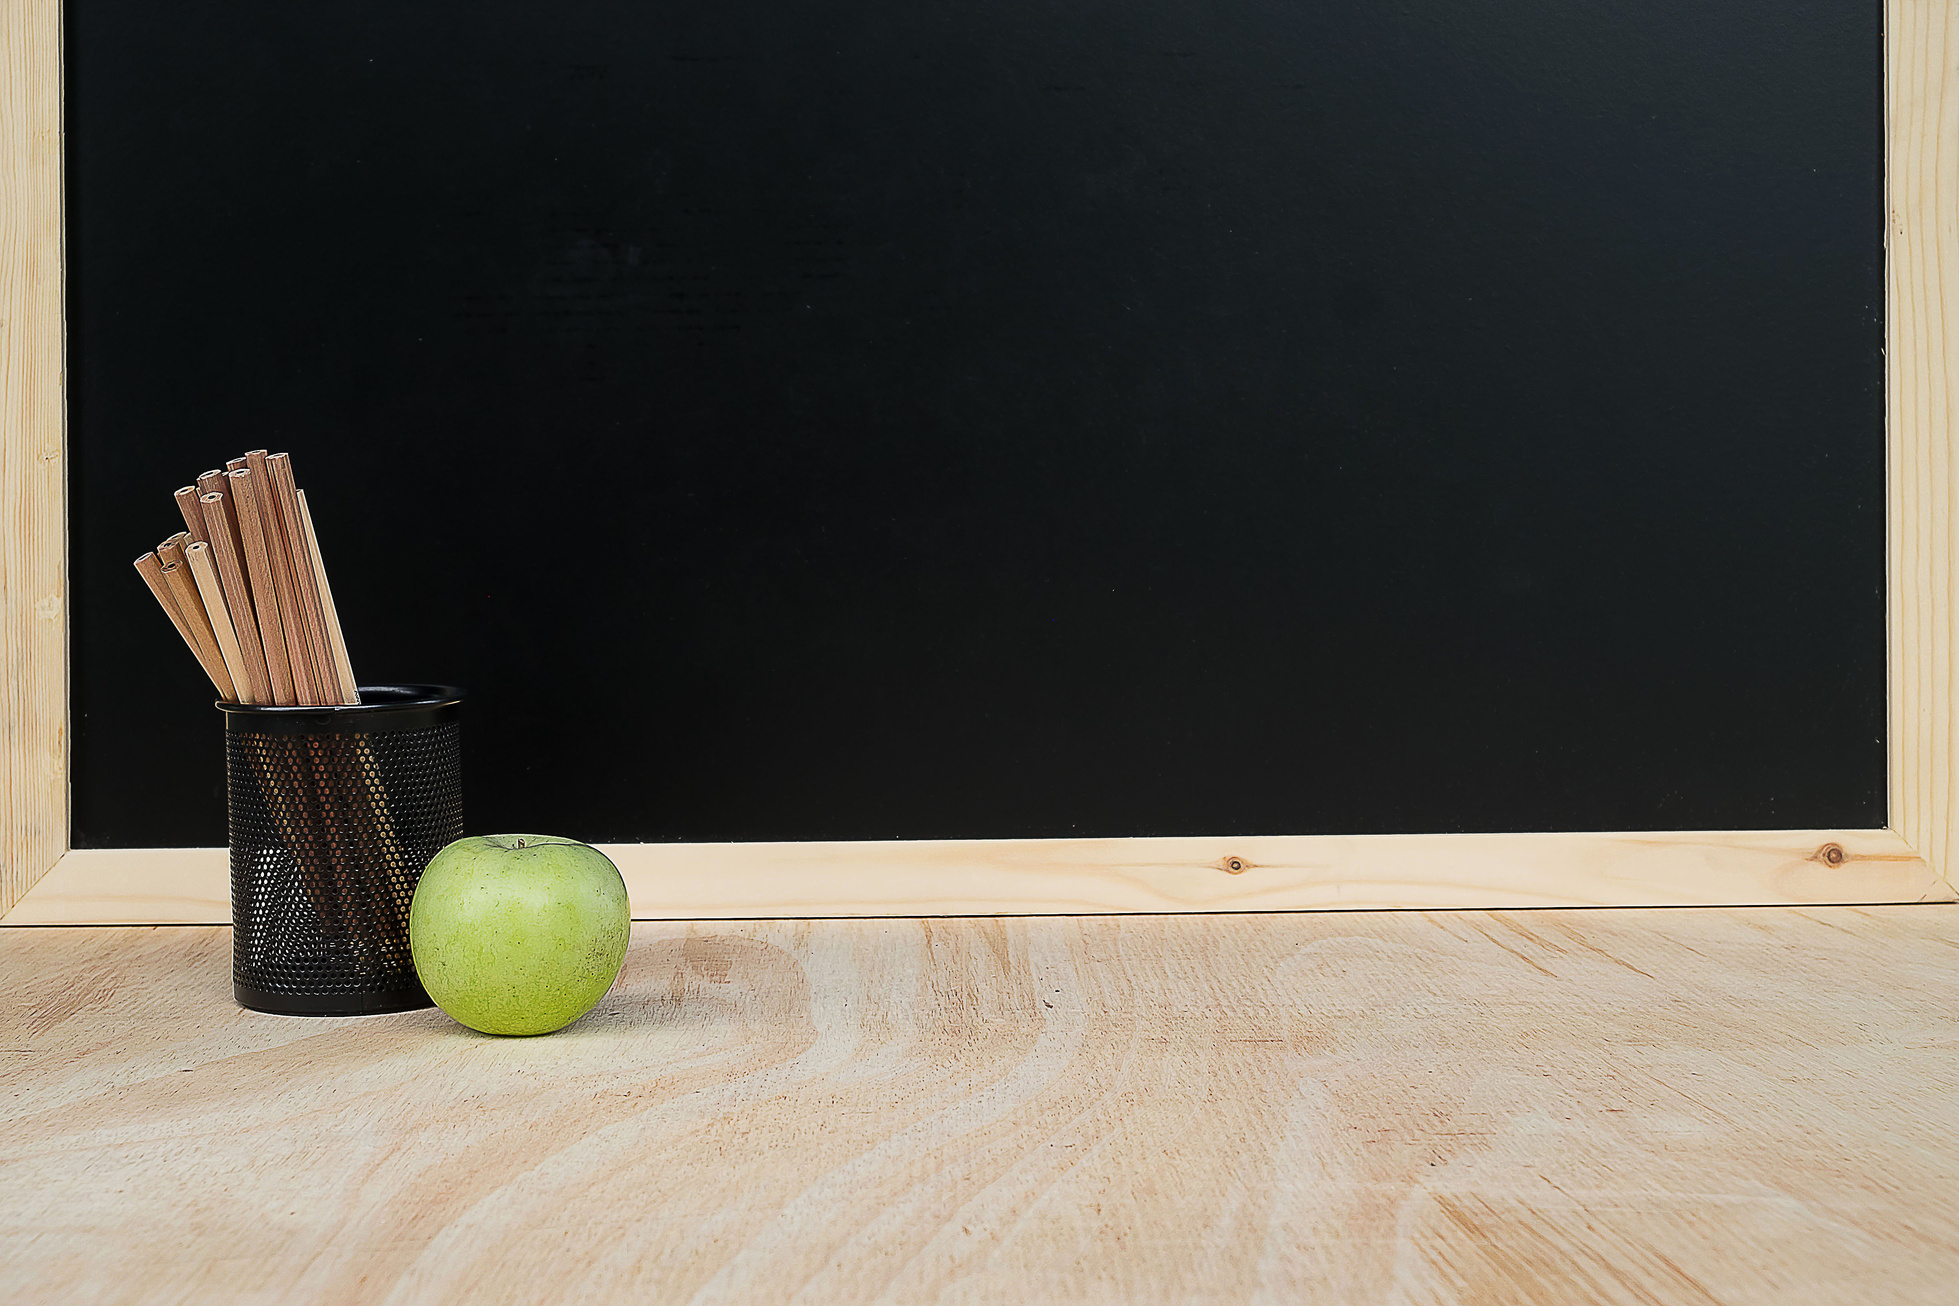 Teacher's desk with a pencil, apple and other equipment.